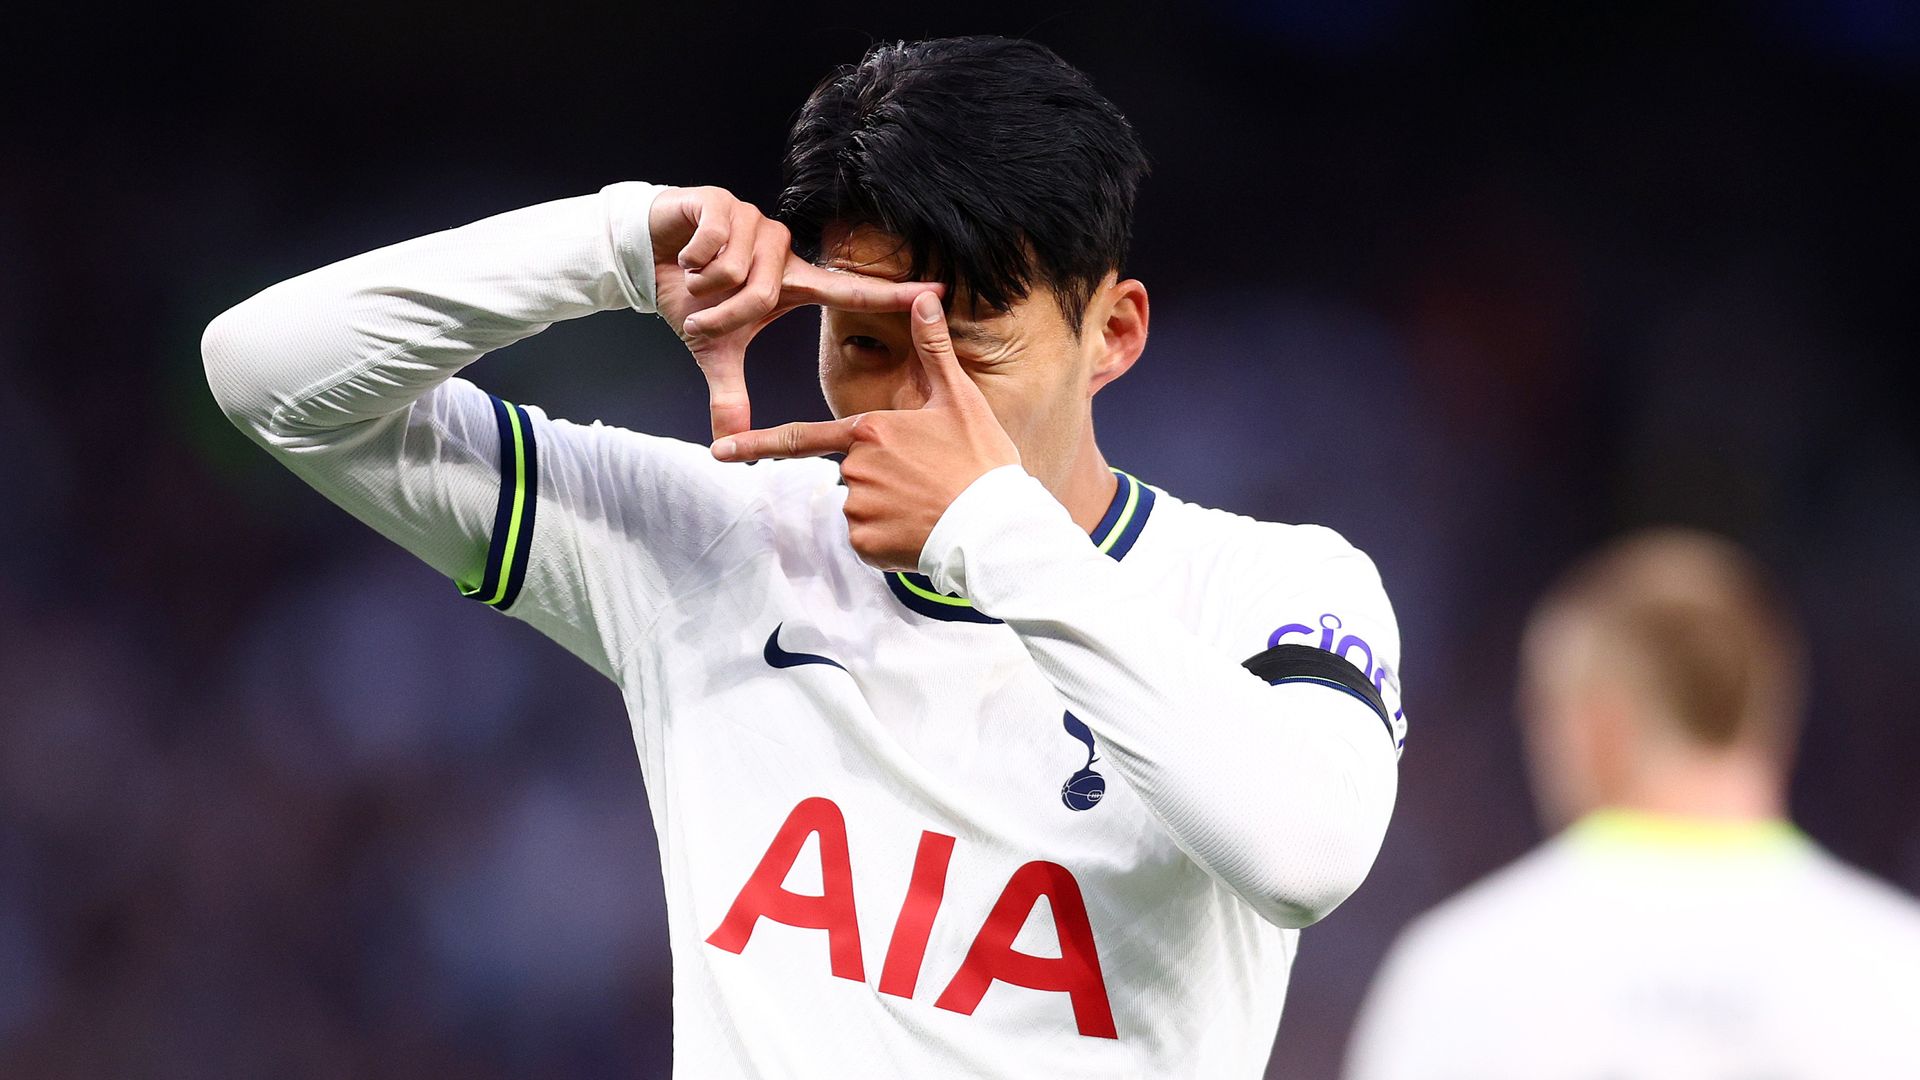 Tottenham 6-2 Leicester: Heung-min Son ends drought with second half hat-trick